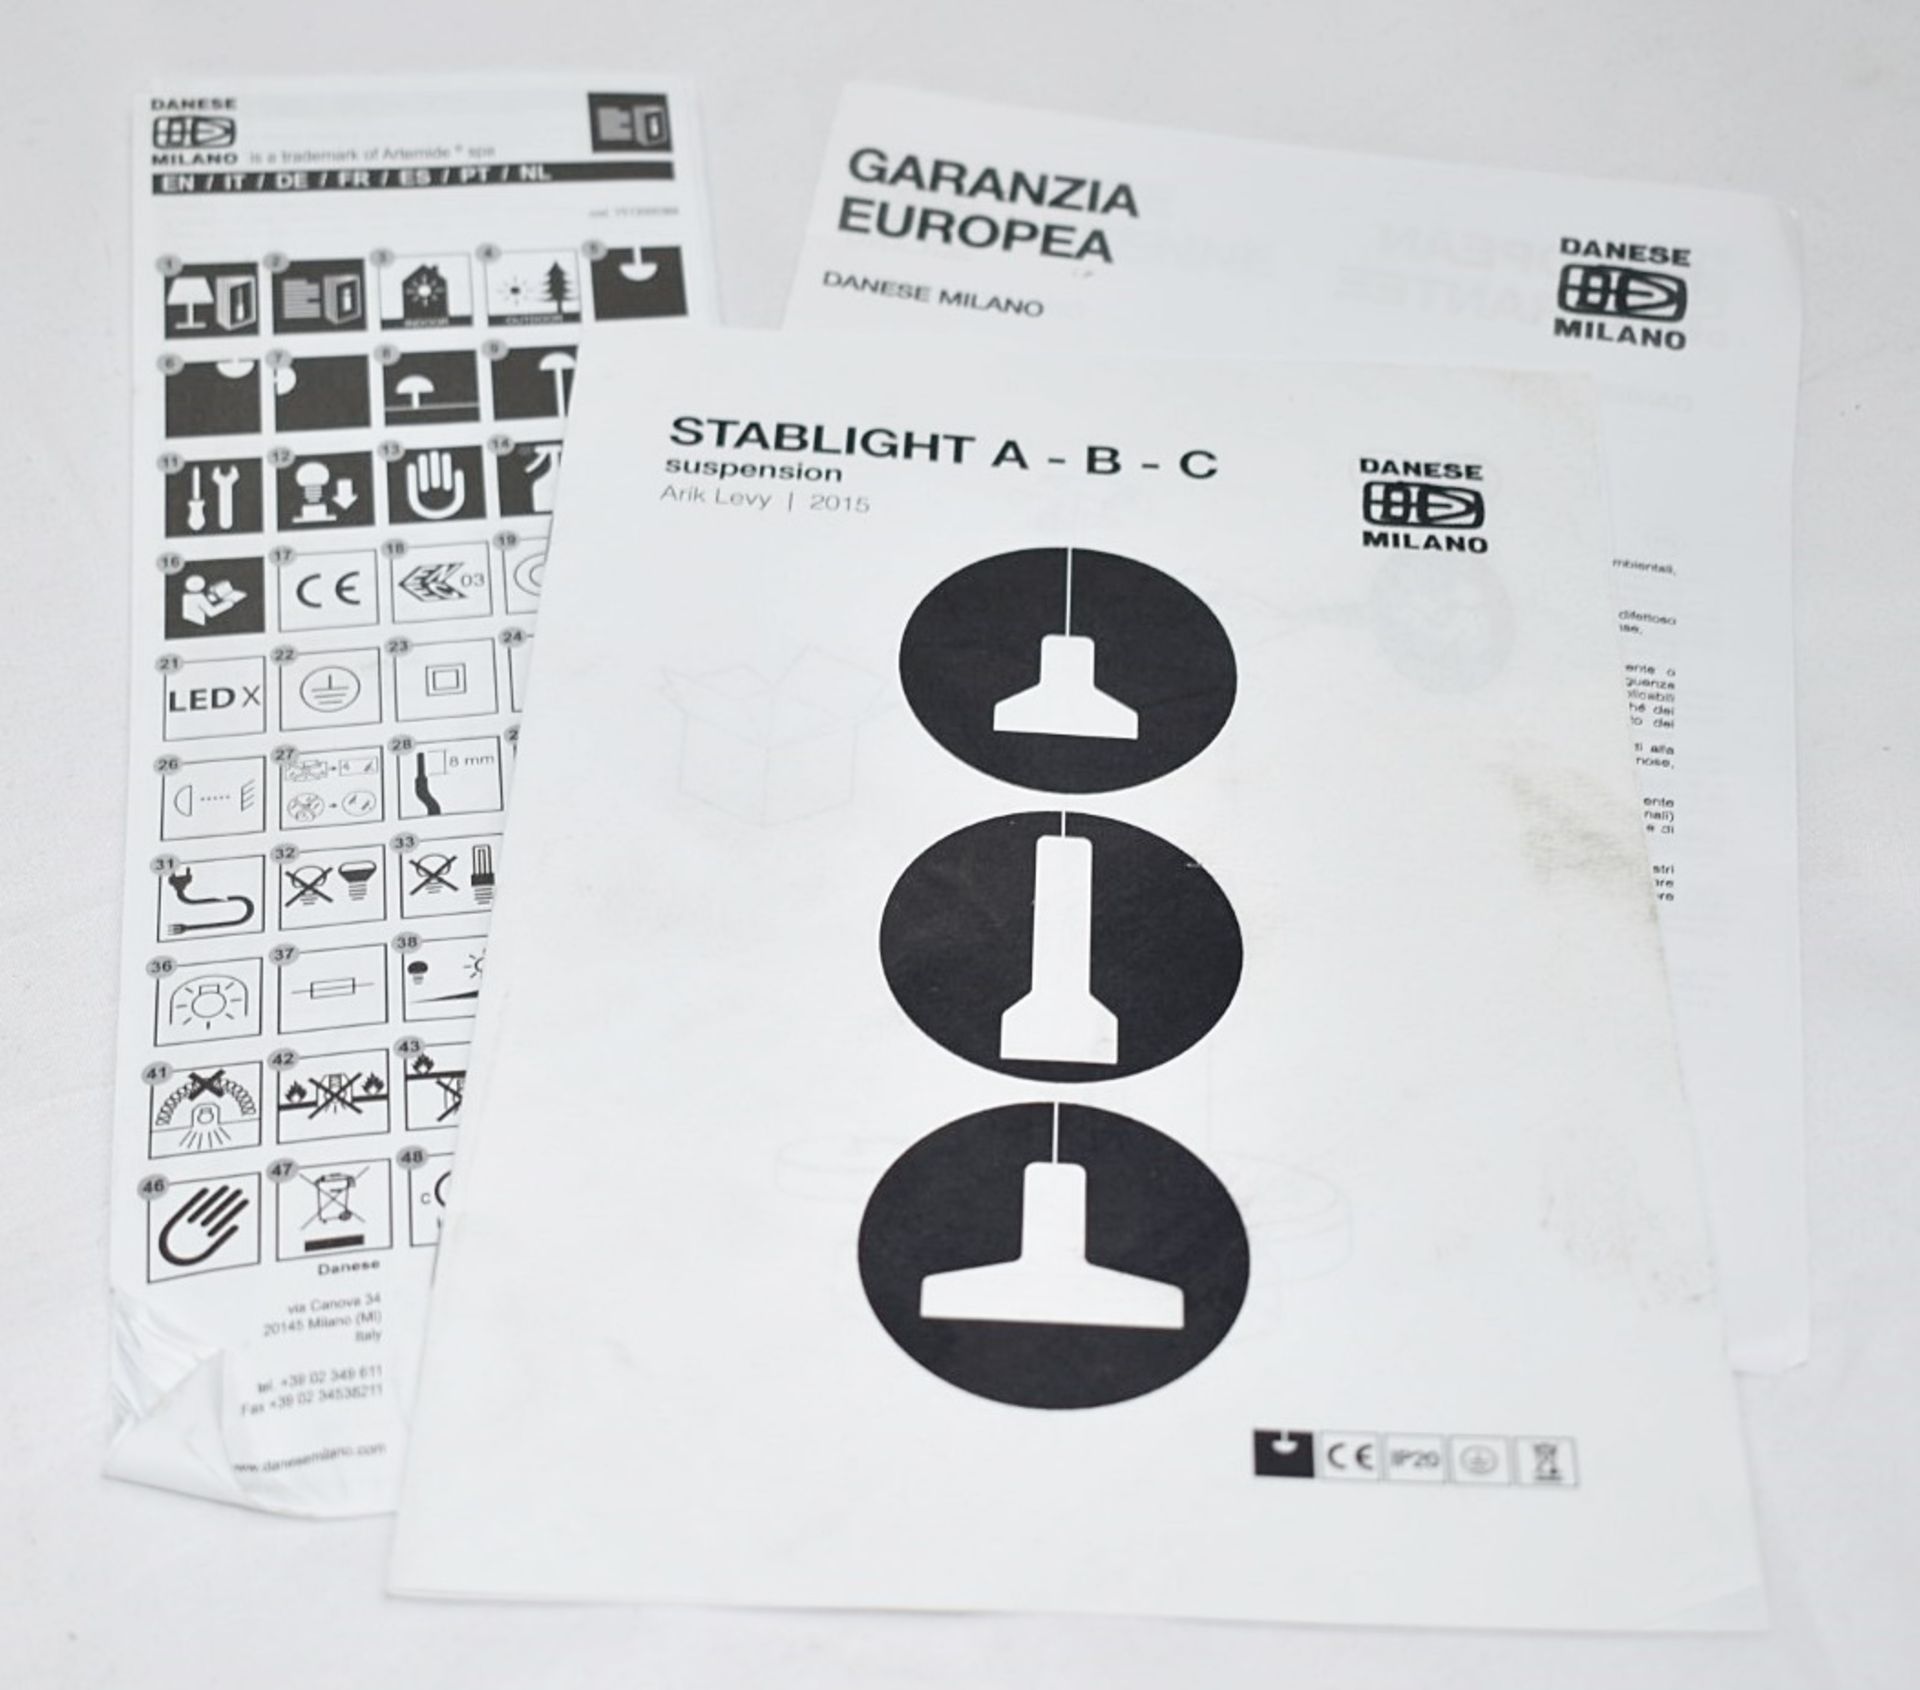 1 x ARTEMIDE Stablight "C" Designer Pendant Light Fitting With Blown Glass Diffuser - RRP £320.00 - Image 12 of 12